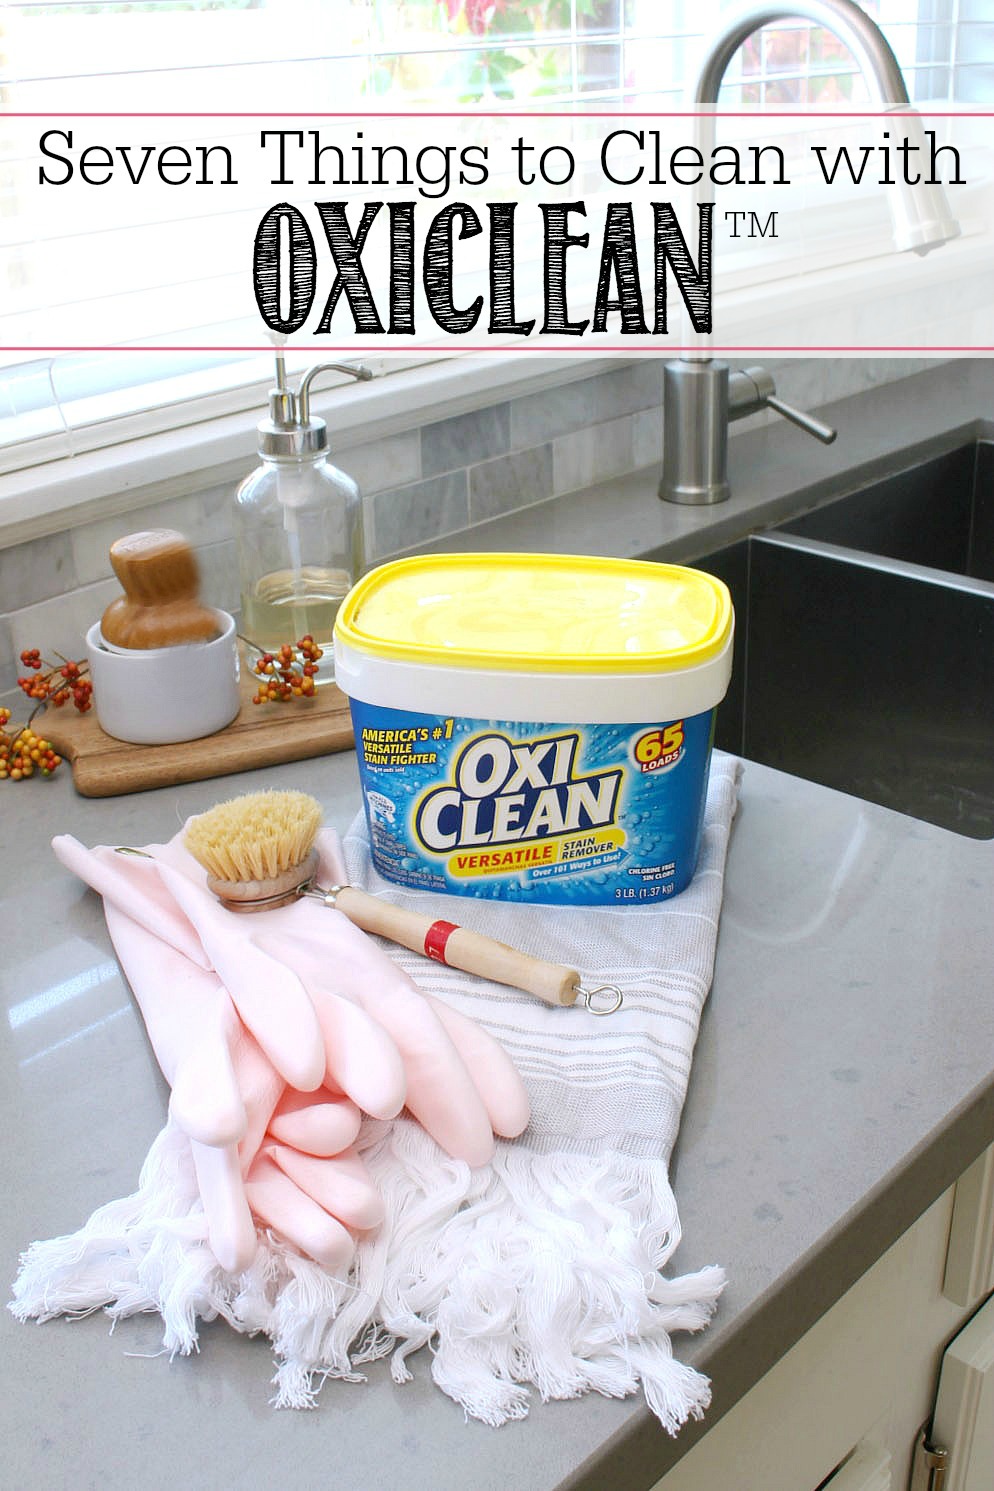 7 Things to Clean with Oxiclean - Clean